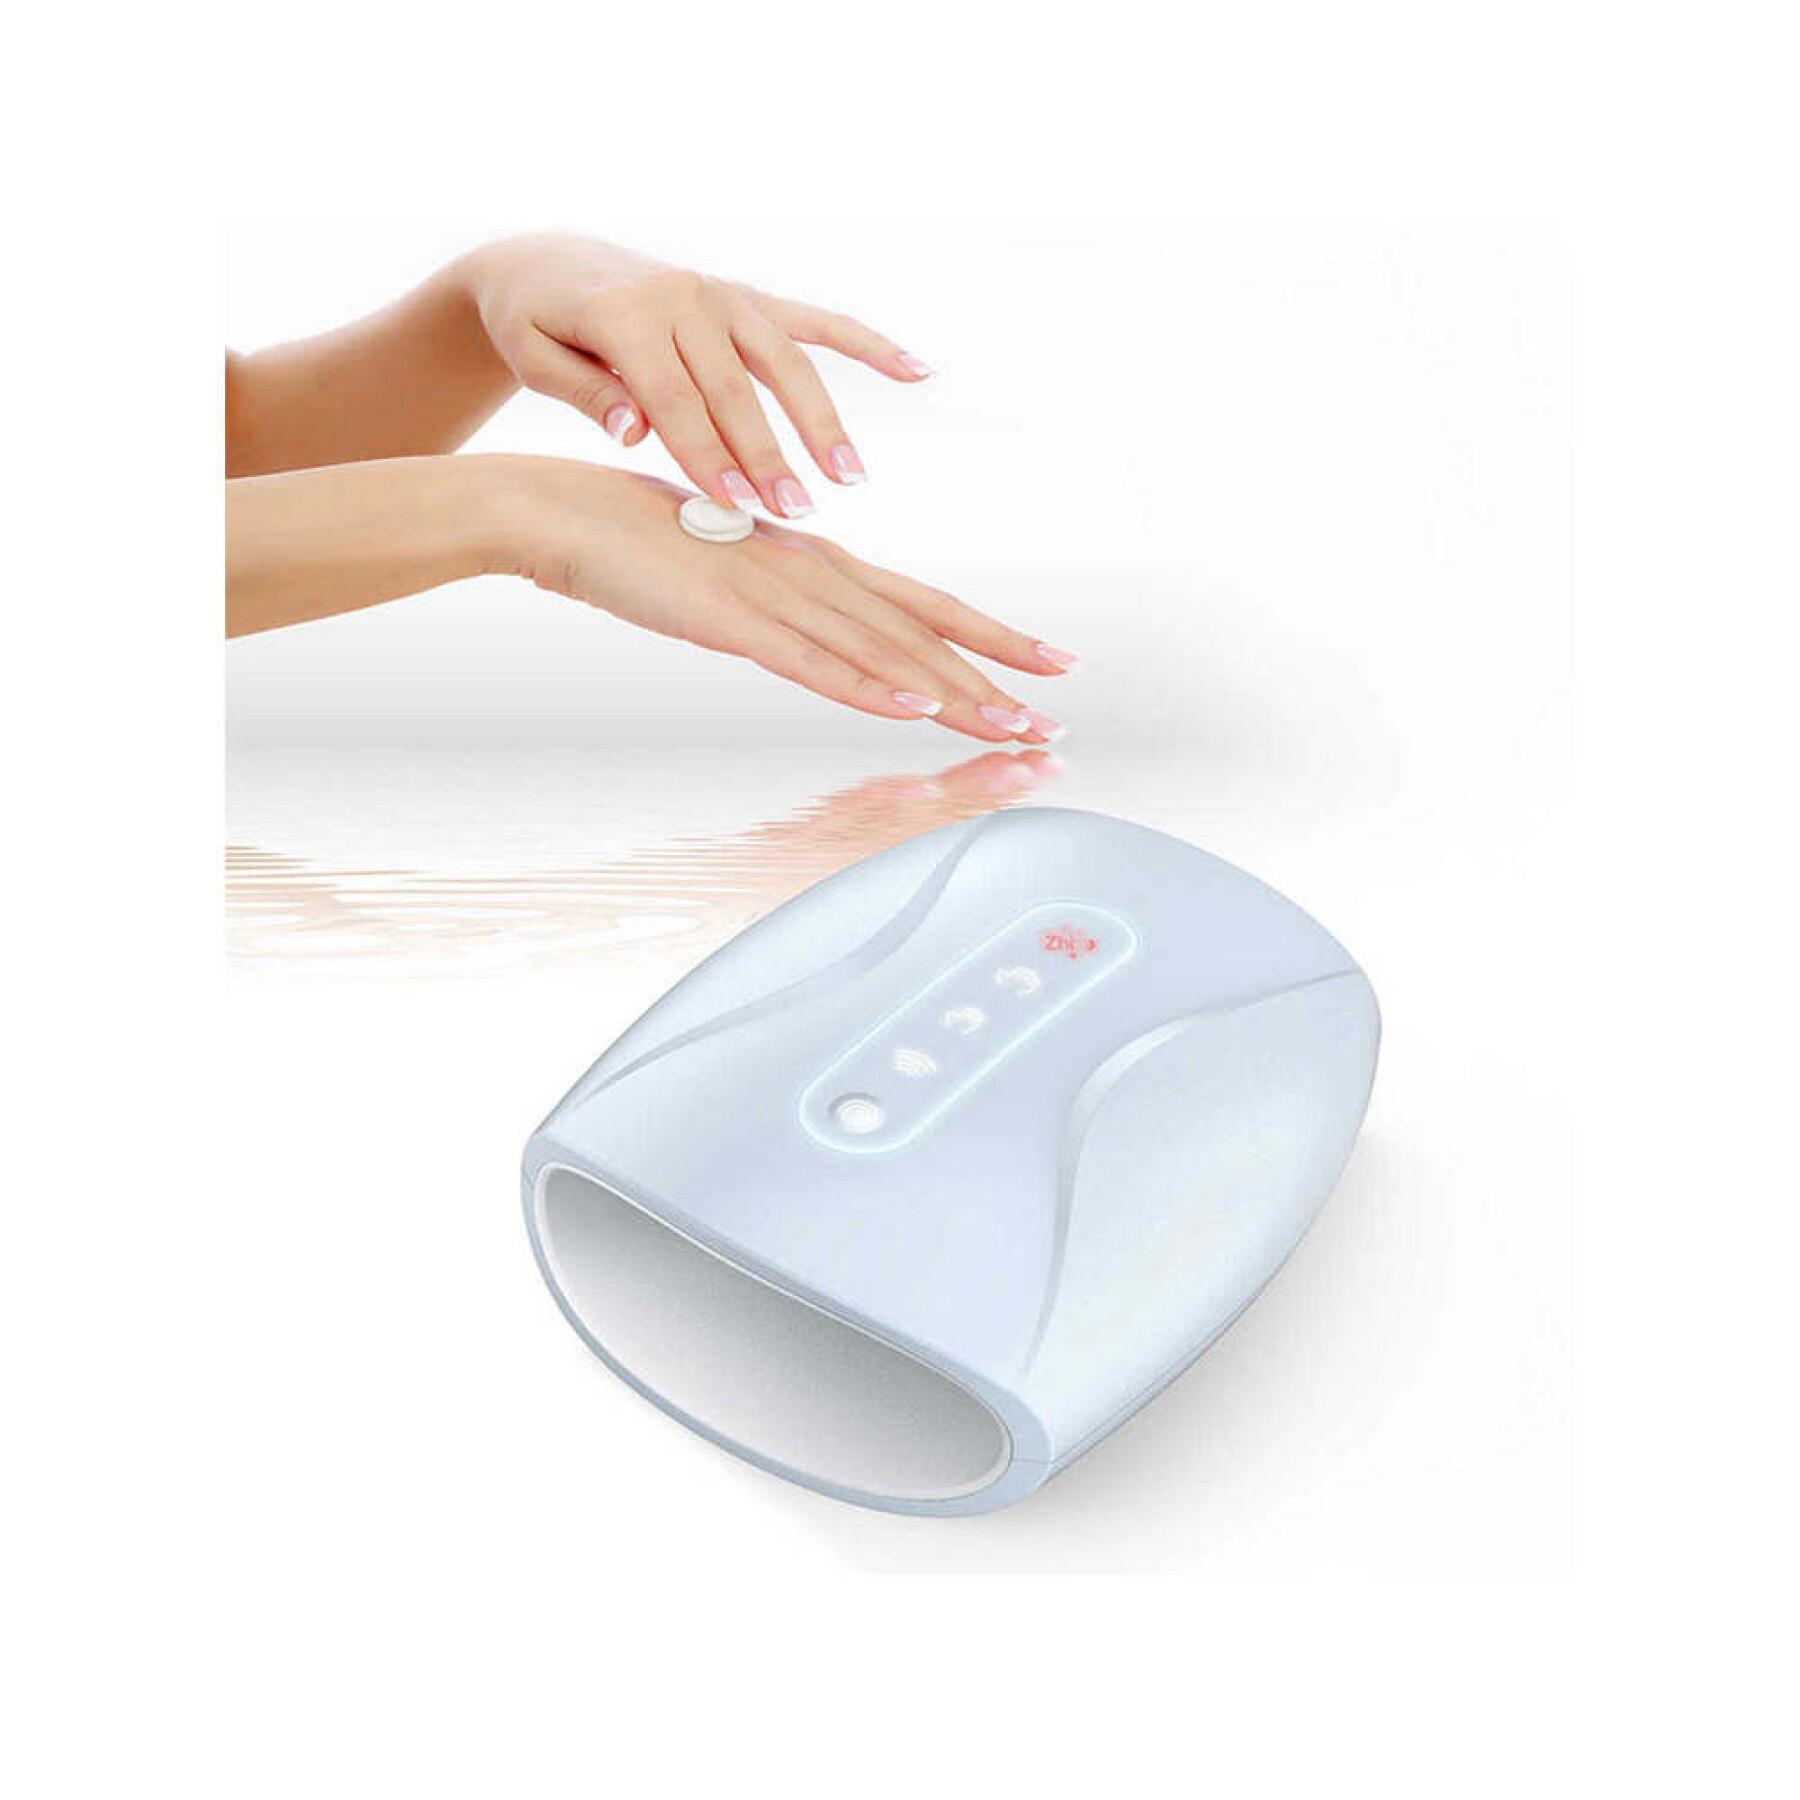 Hand massager with heating function Synerfit Fitness Desira